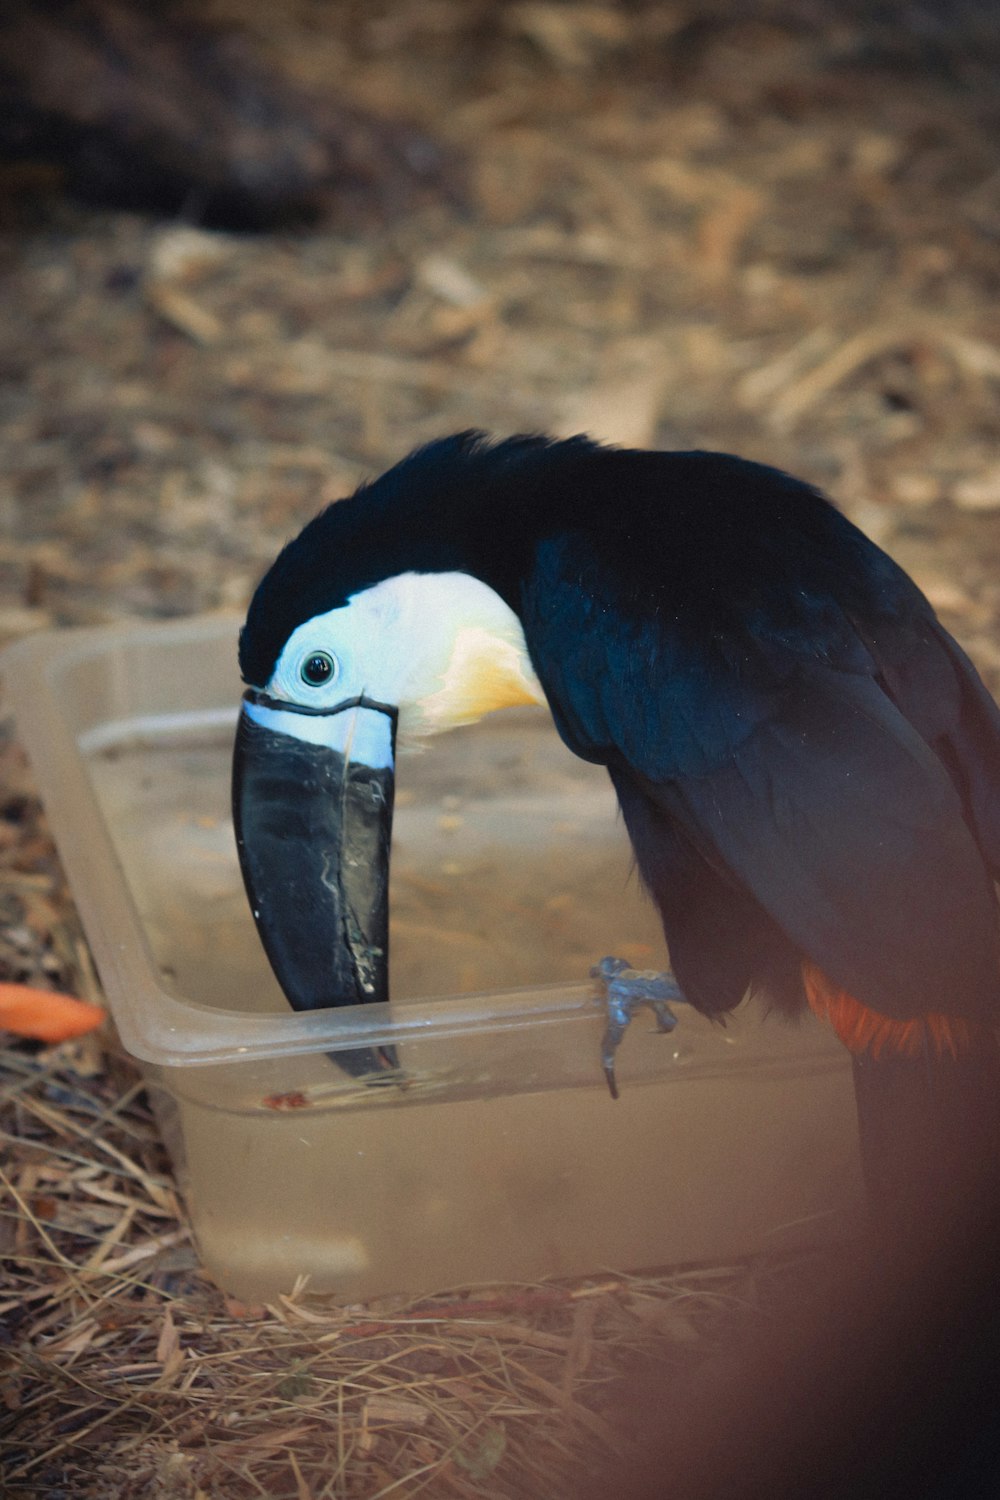 a black and white bird with a beak in a plastic container